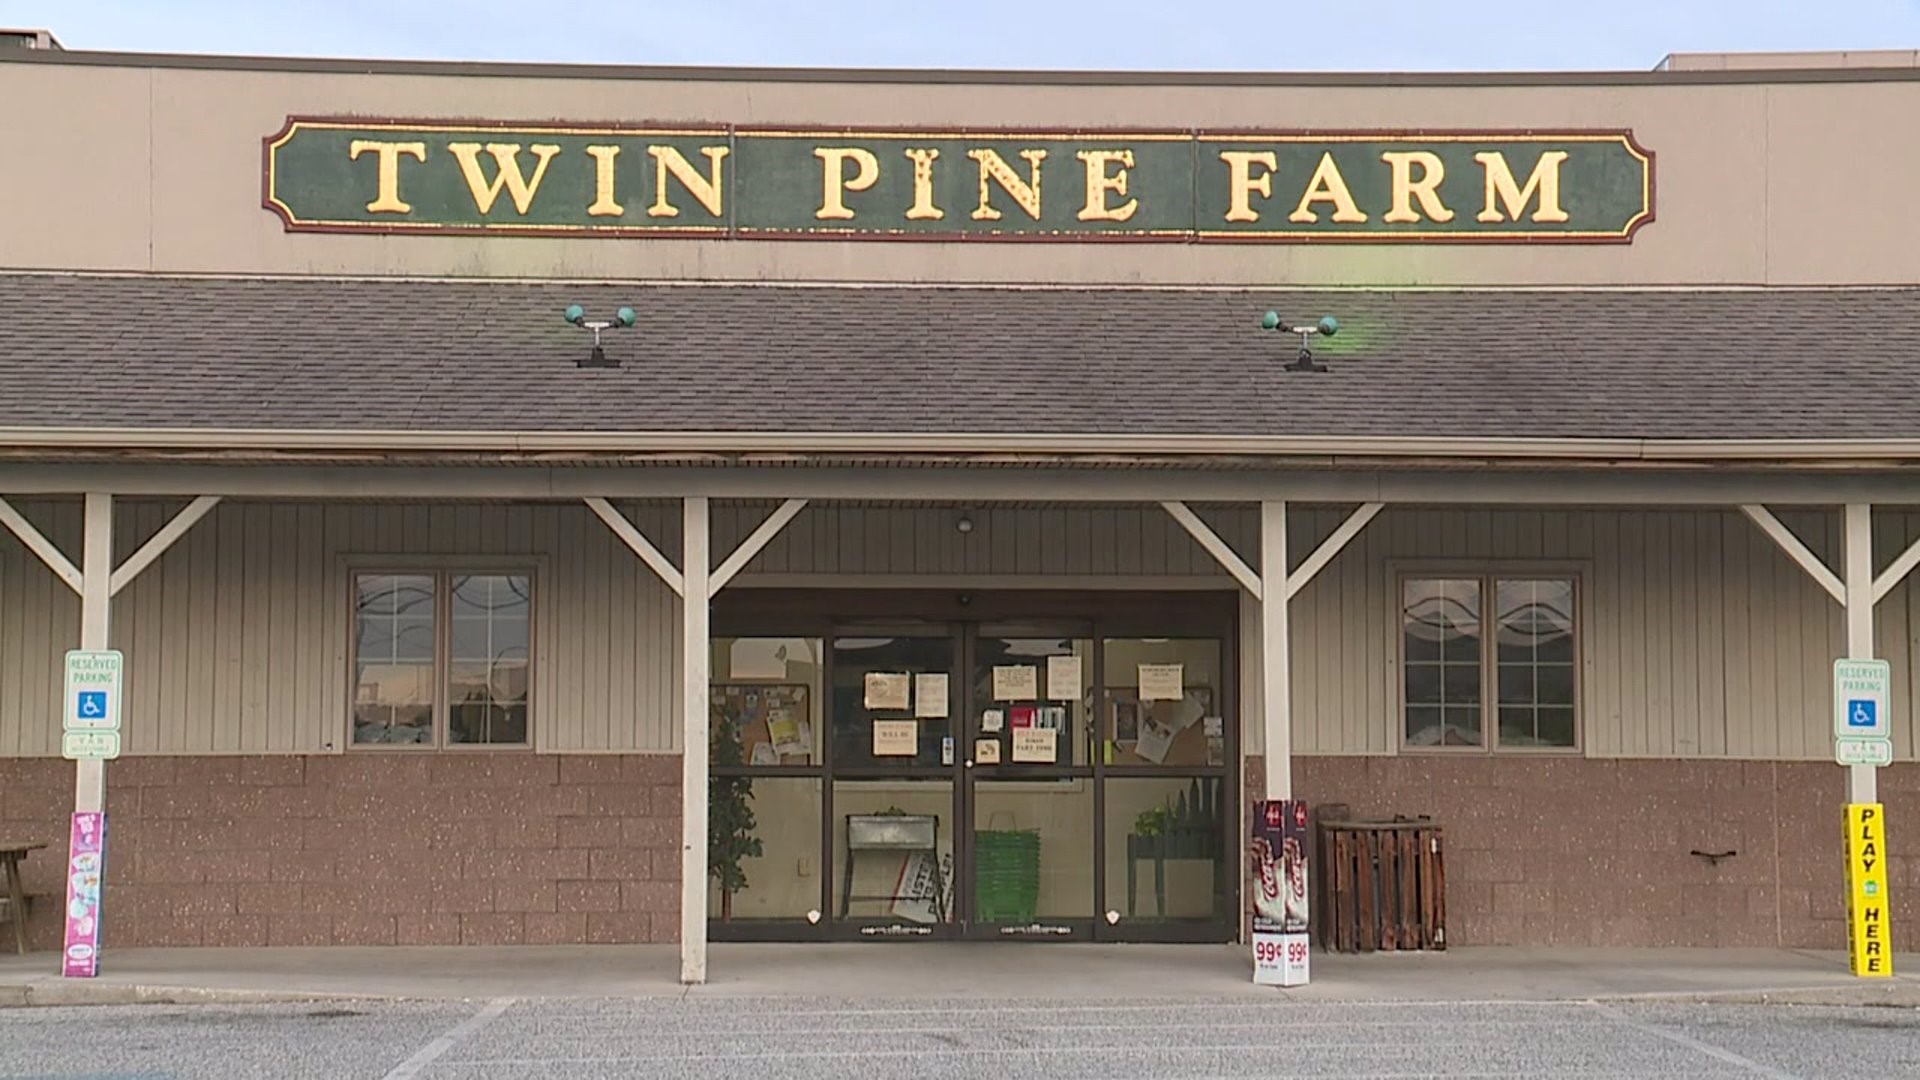 Twin Pine Farms in Seven Valleys said in a viral Facebook post that it has decided to let its employees and customers choose whether wear a mask or not.